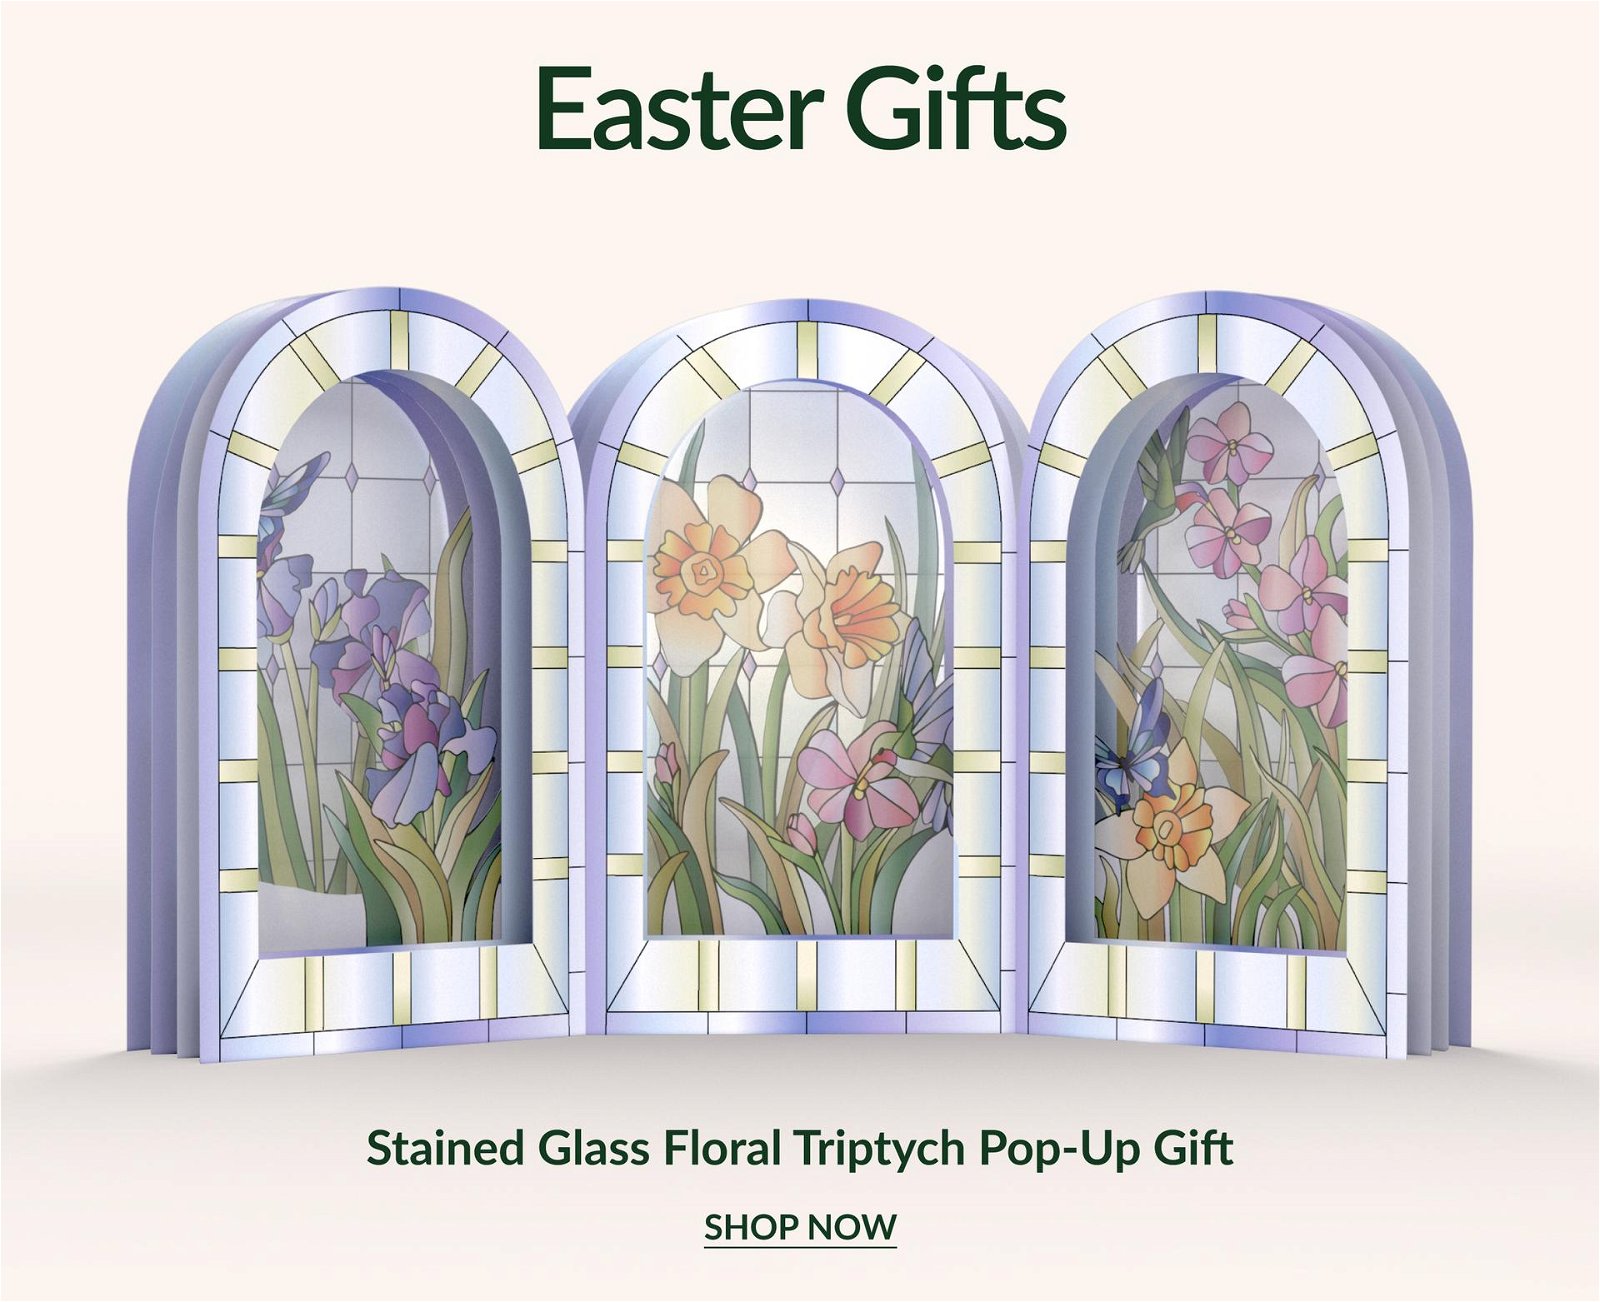 Stained Glass Floral Triptych Pop-Up Gift